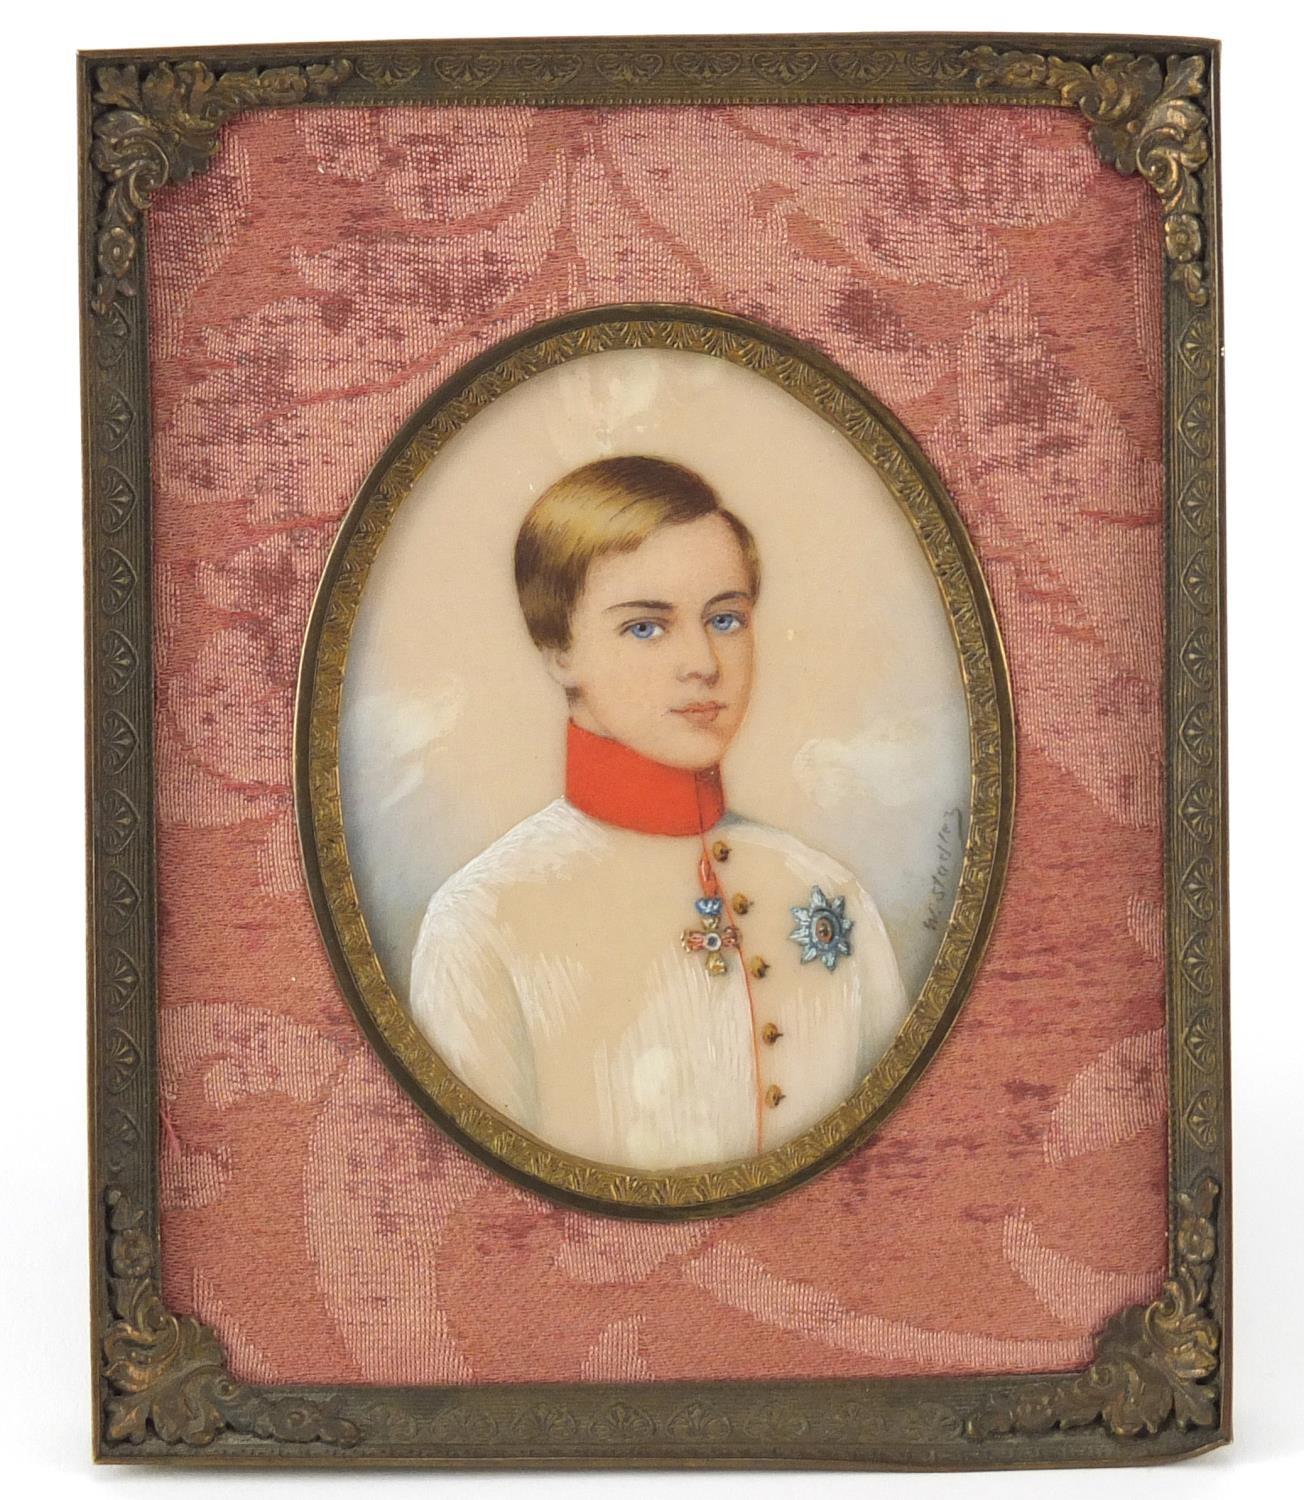 Imperial Russian hand painted portrait miniature on ivory, depicting young Franz Joseph Emperor of